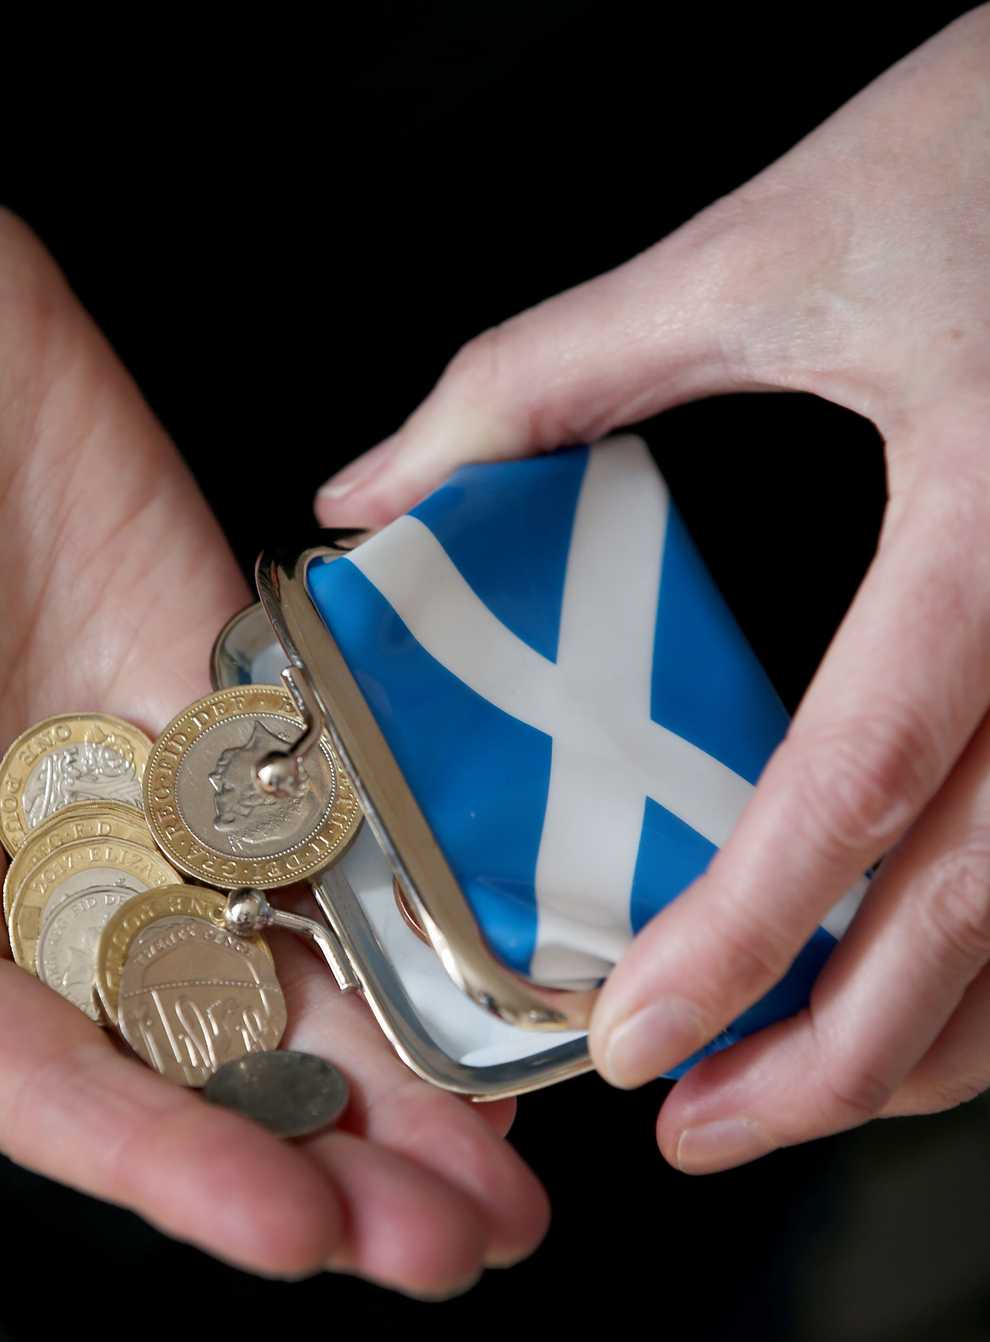 Scotland risks being ‘left behind’ unless SNP ministers adopt the tax cutting policies announces for the rest of the UK by Chancellor Kwasi Kwarteng, a Tory MP warned (Jane Barlow/PA)